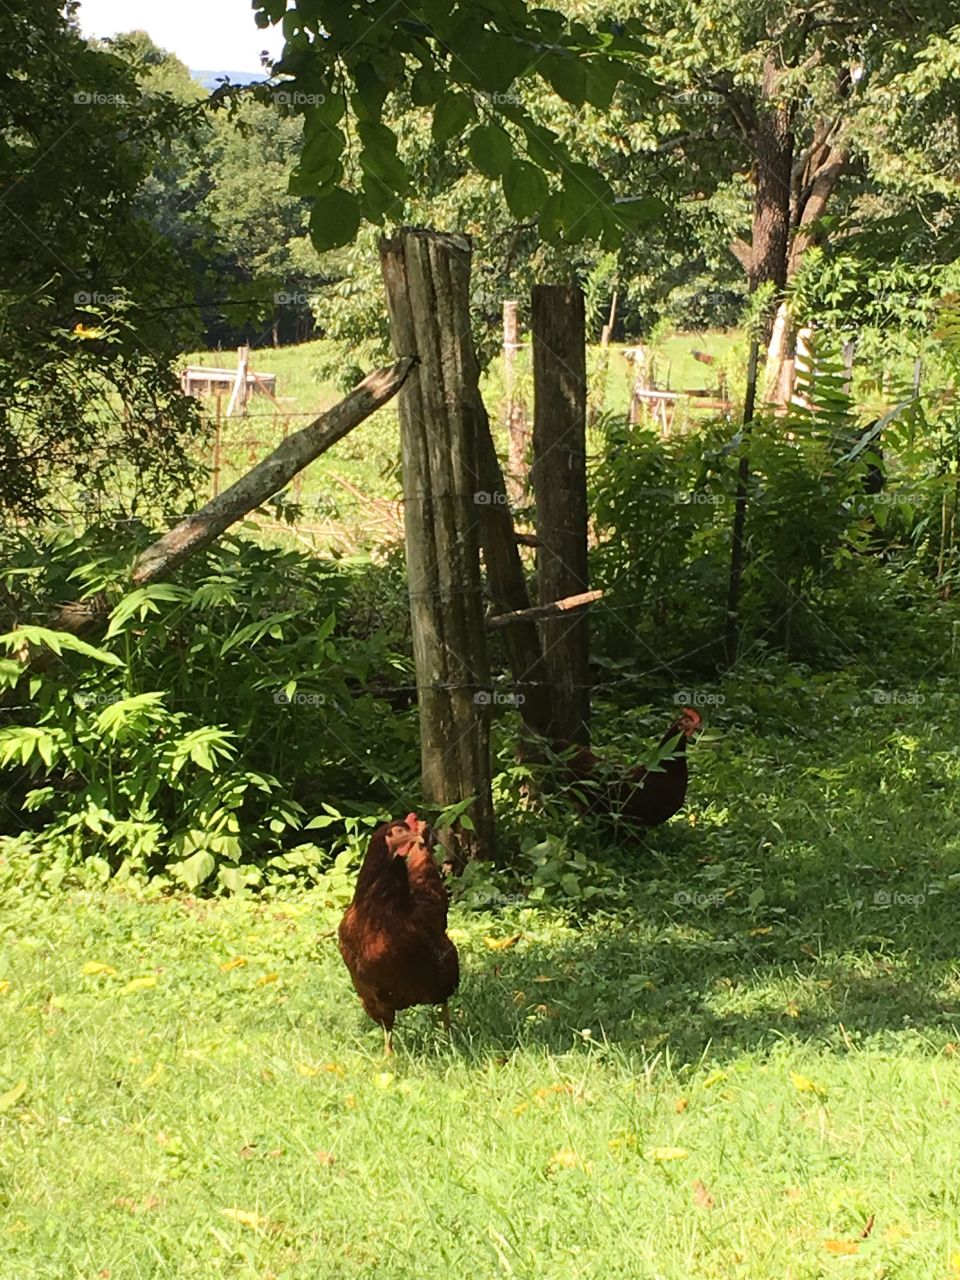 Chickens and fence